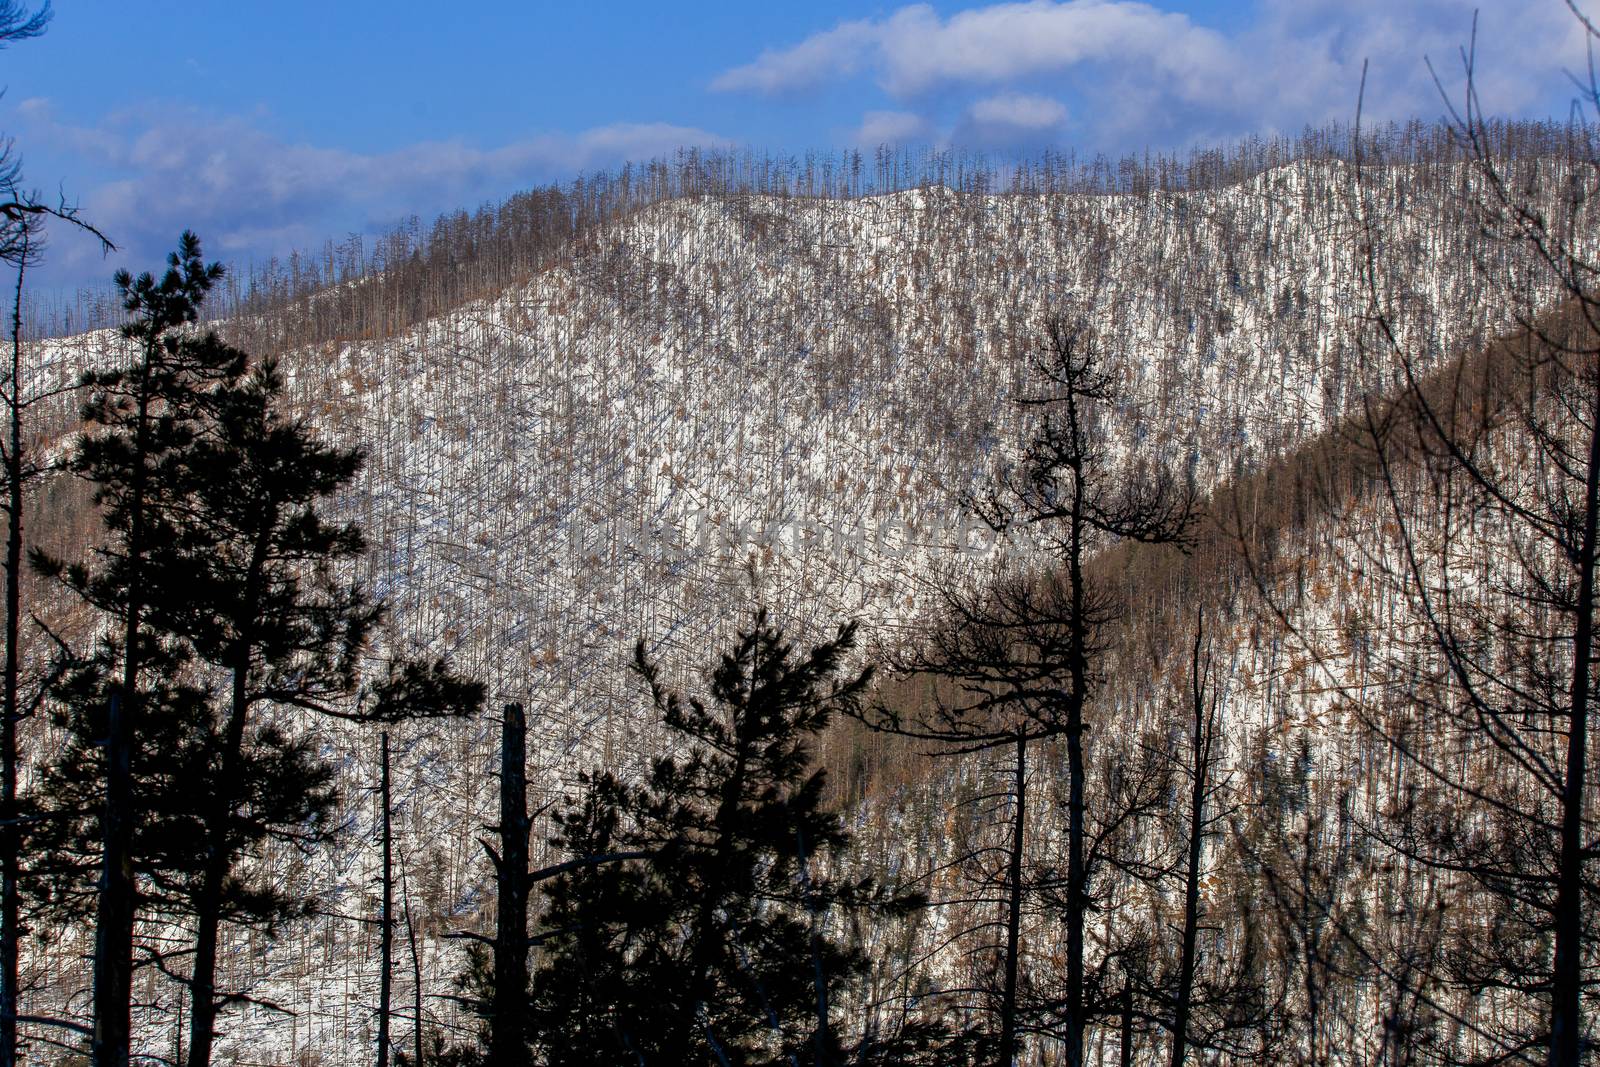 View of the snow-capped mountains covered with bare trees and fir trees